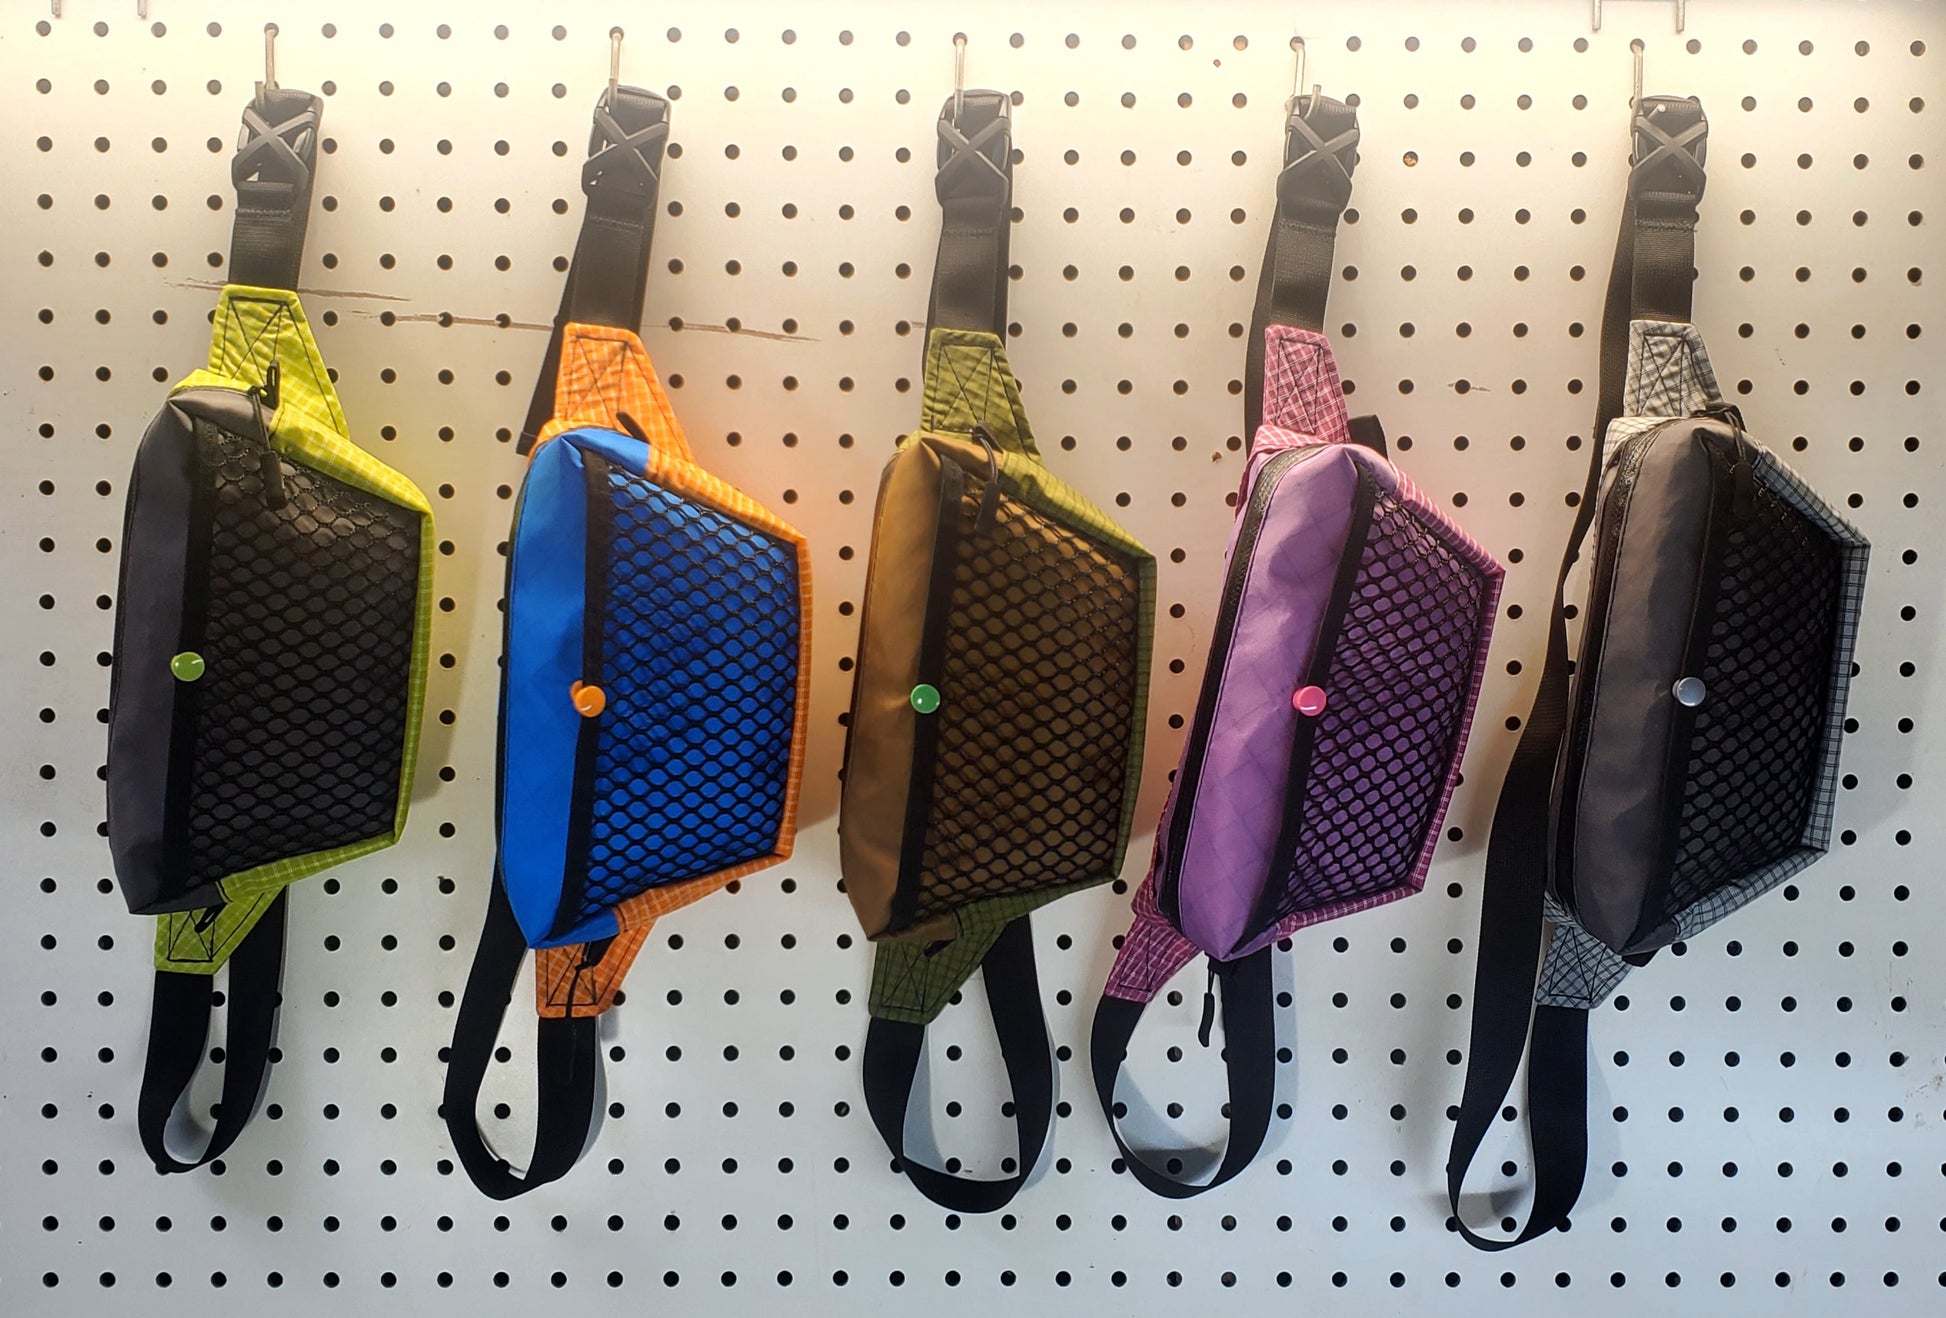 UL fanny packs in multiple color schemes hanging on peg board wall